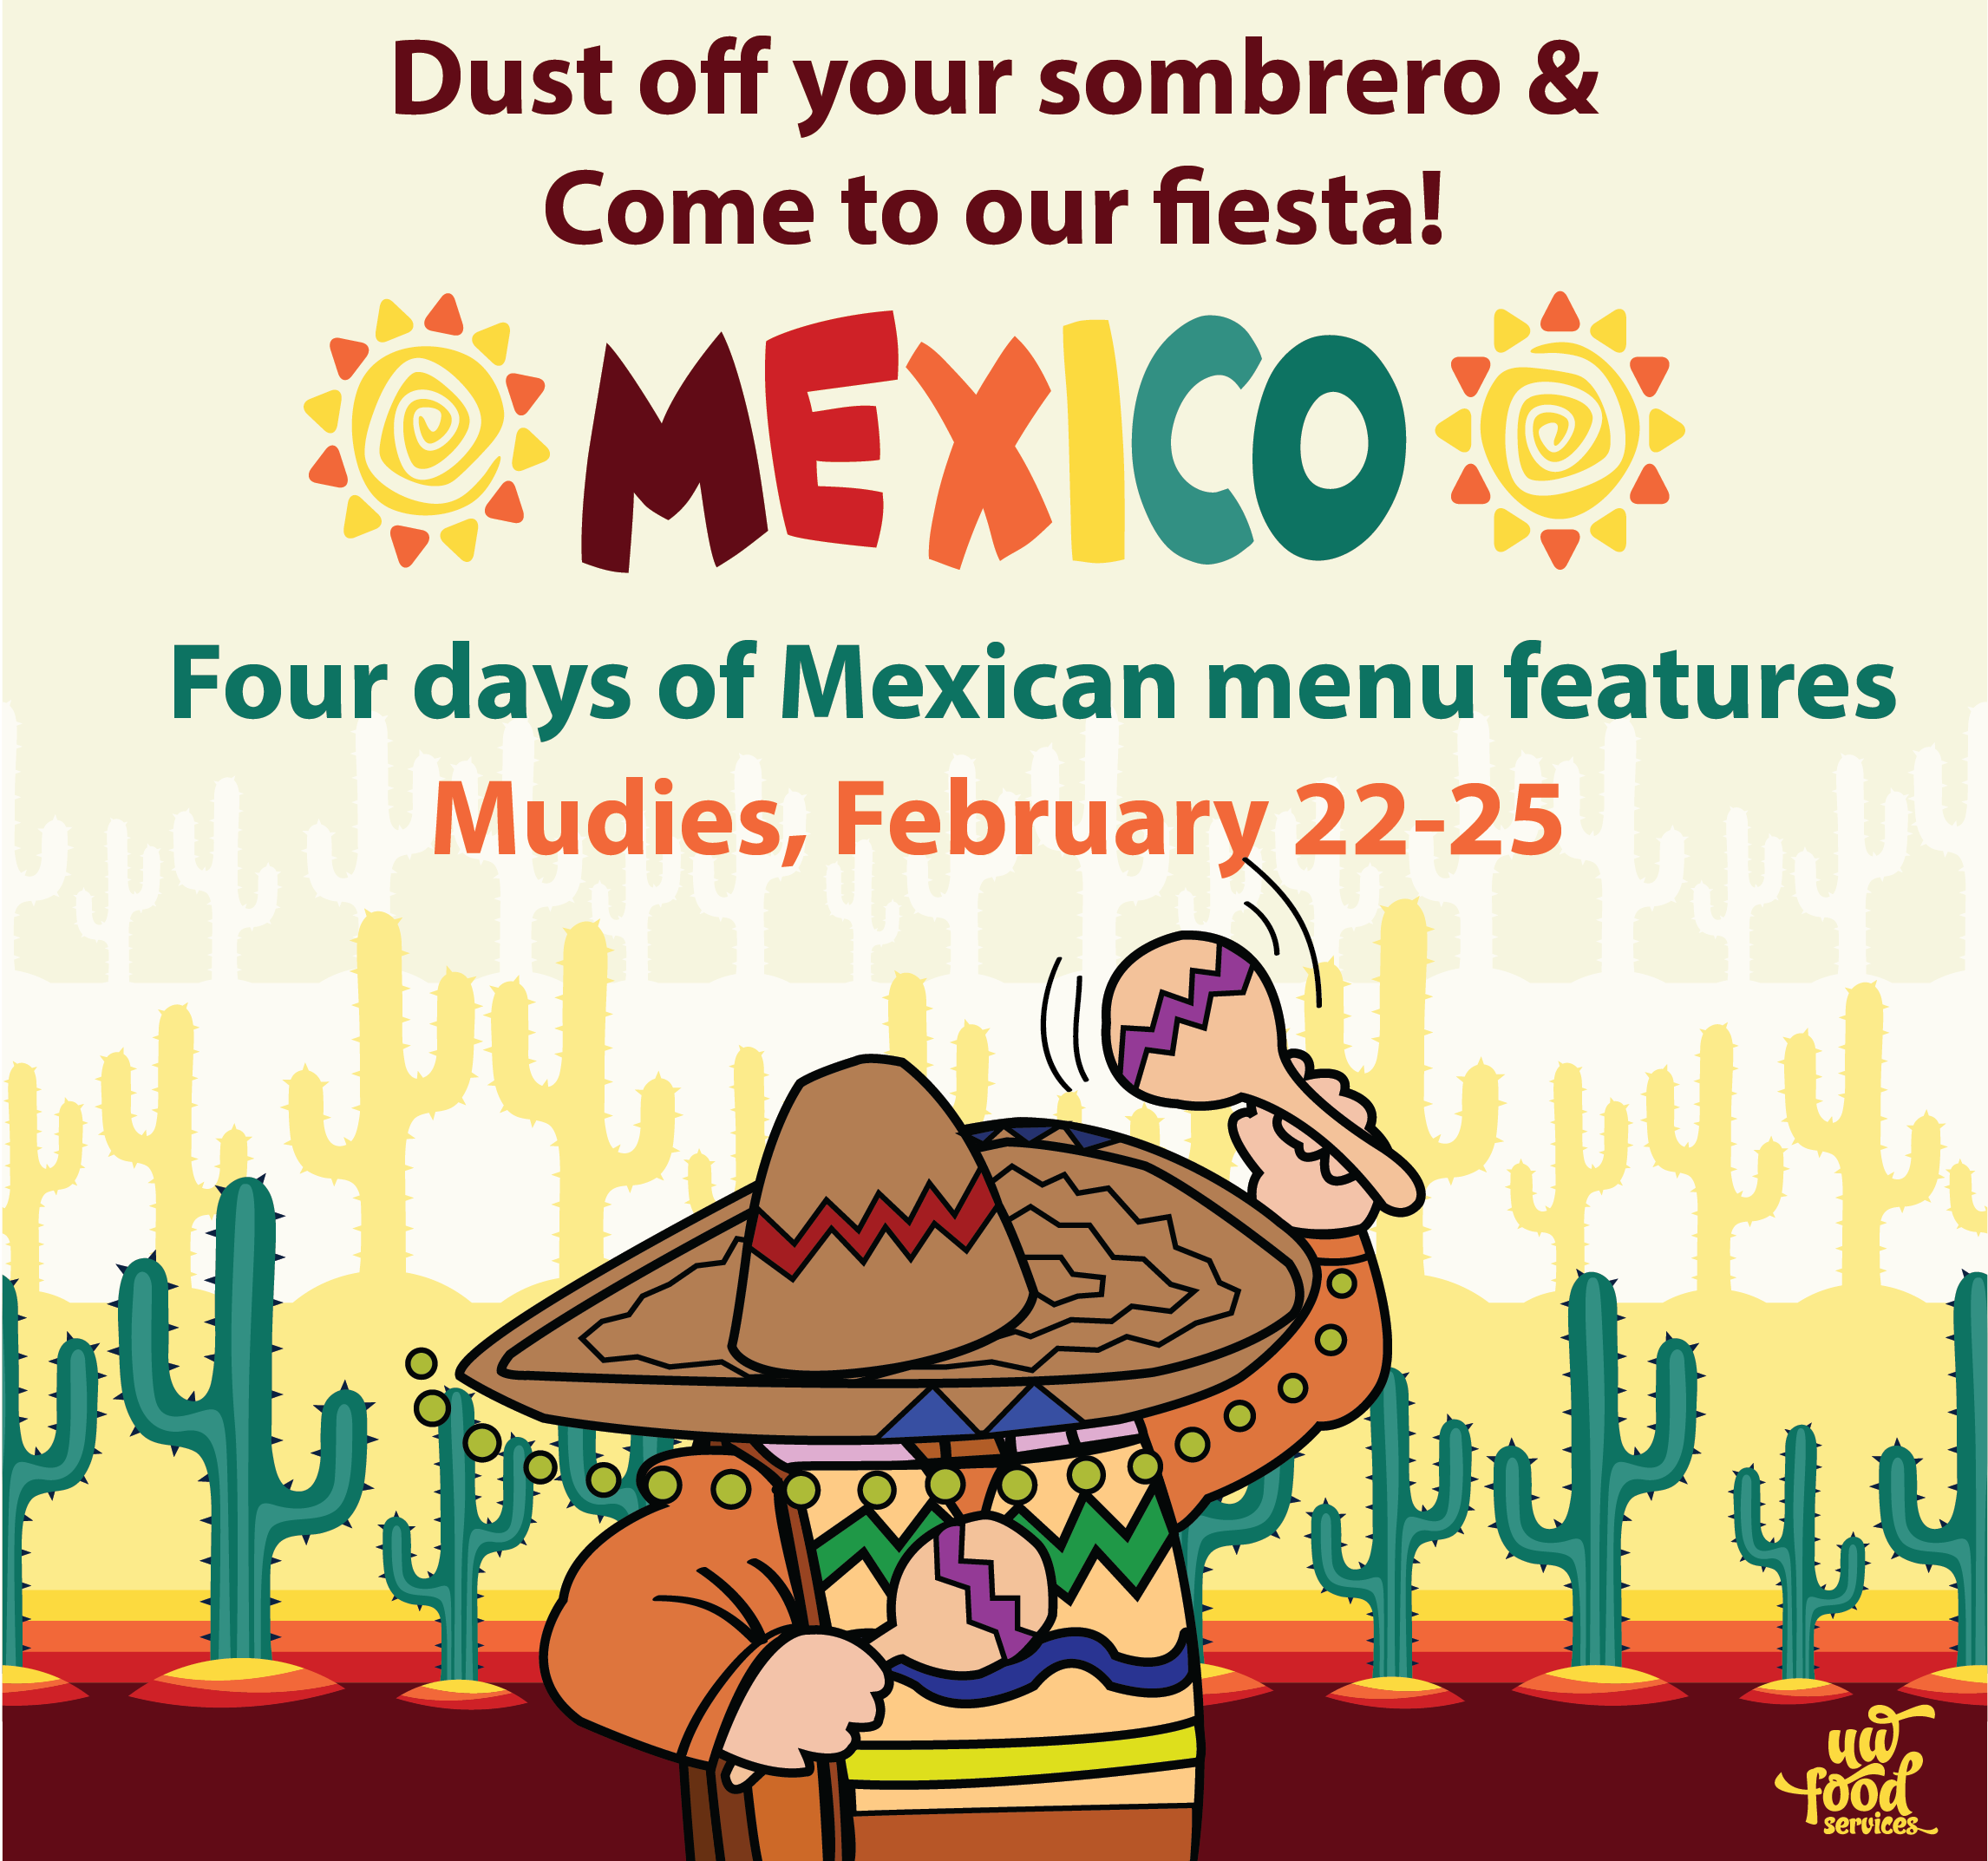 Dust off your sombrero and come to our fiesta! Four days of Mexican features